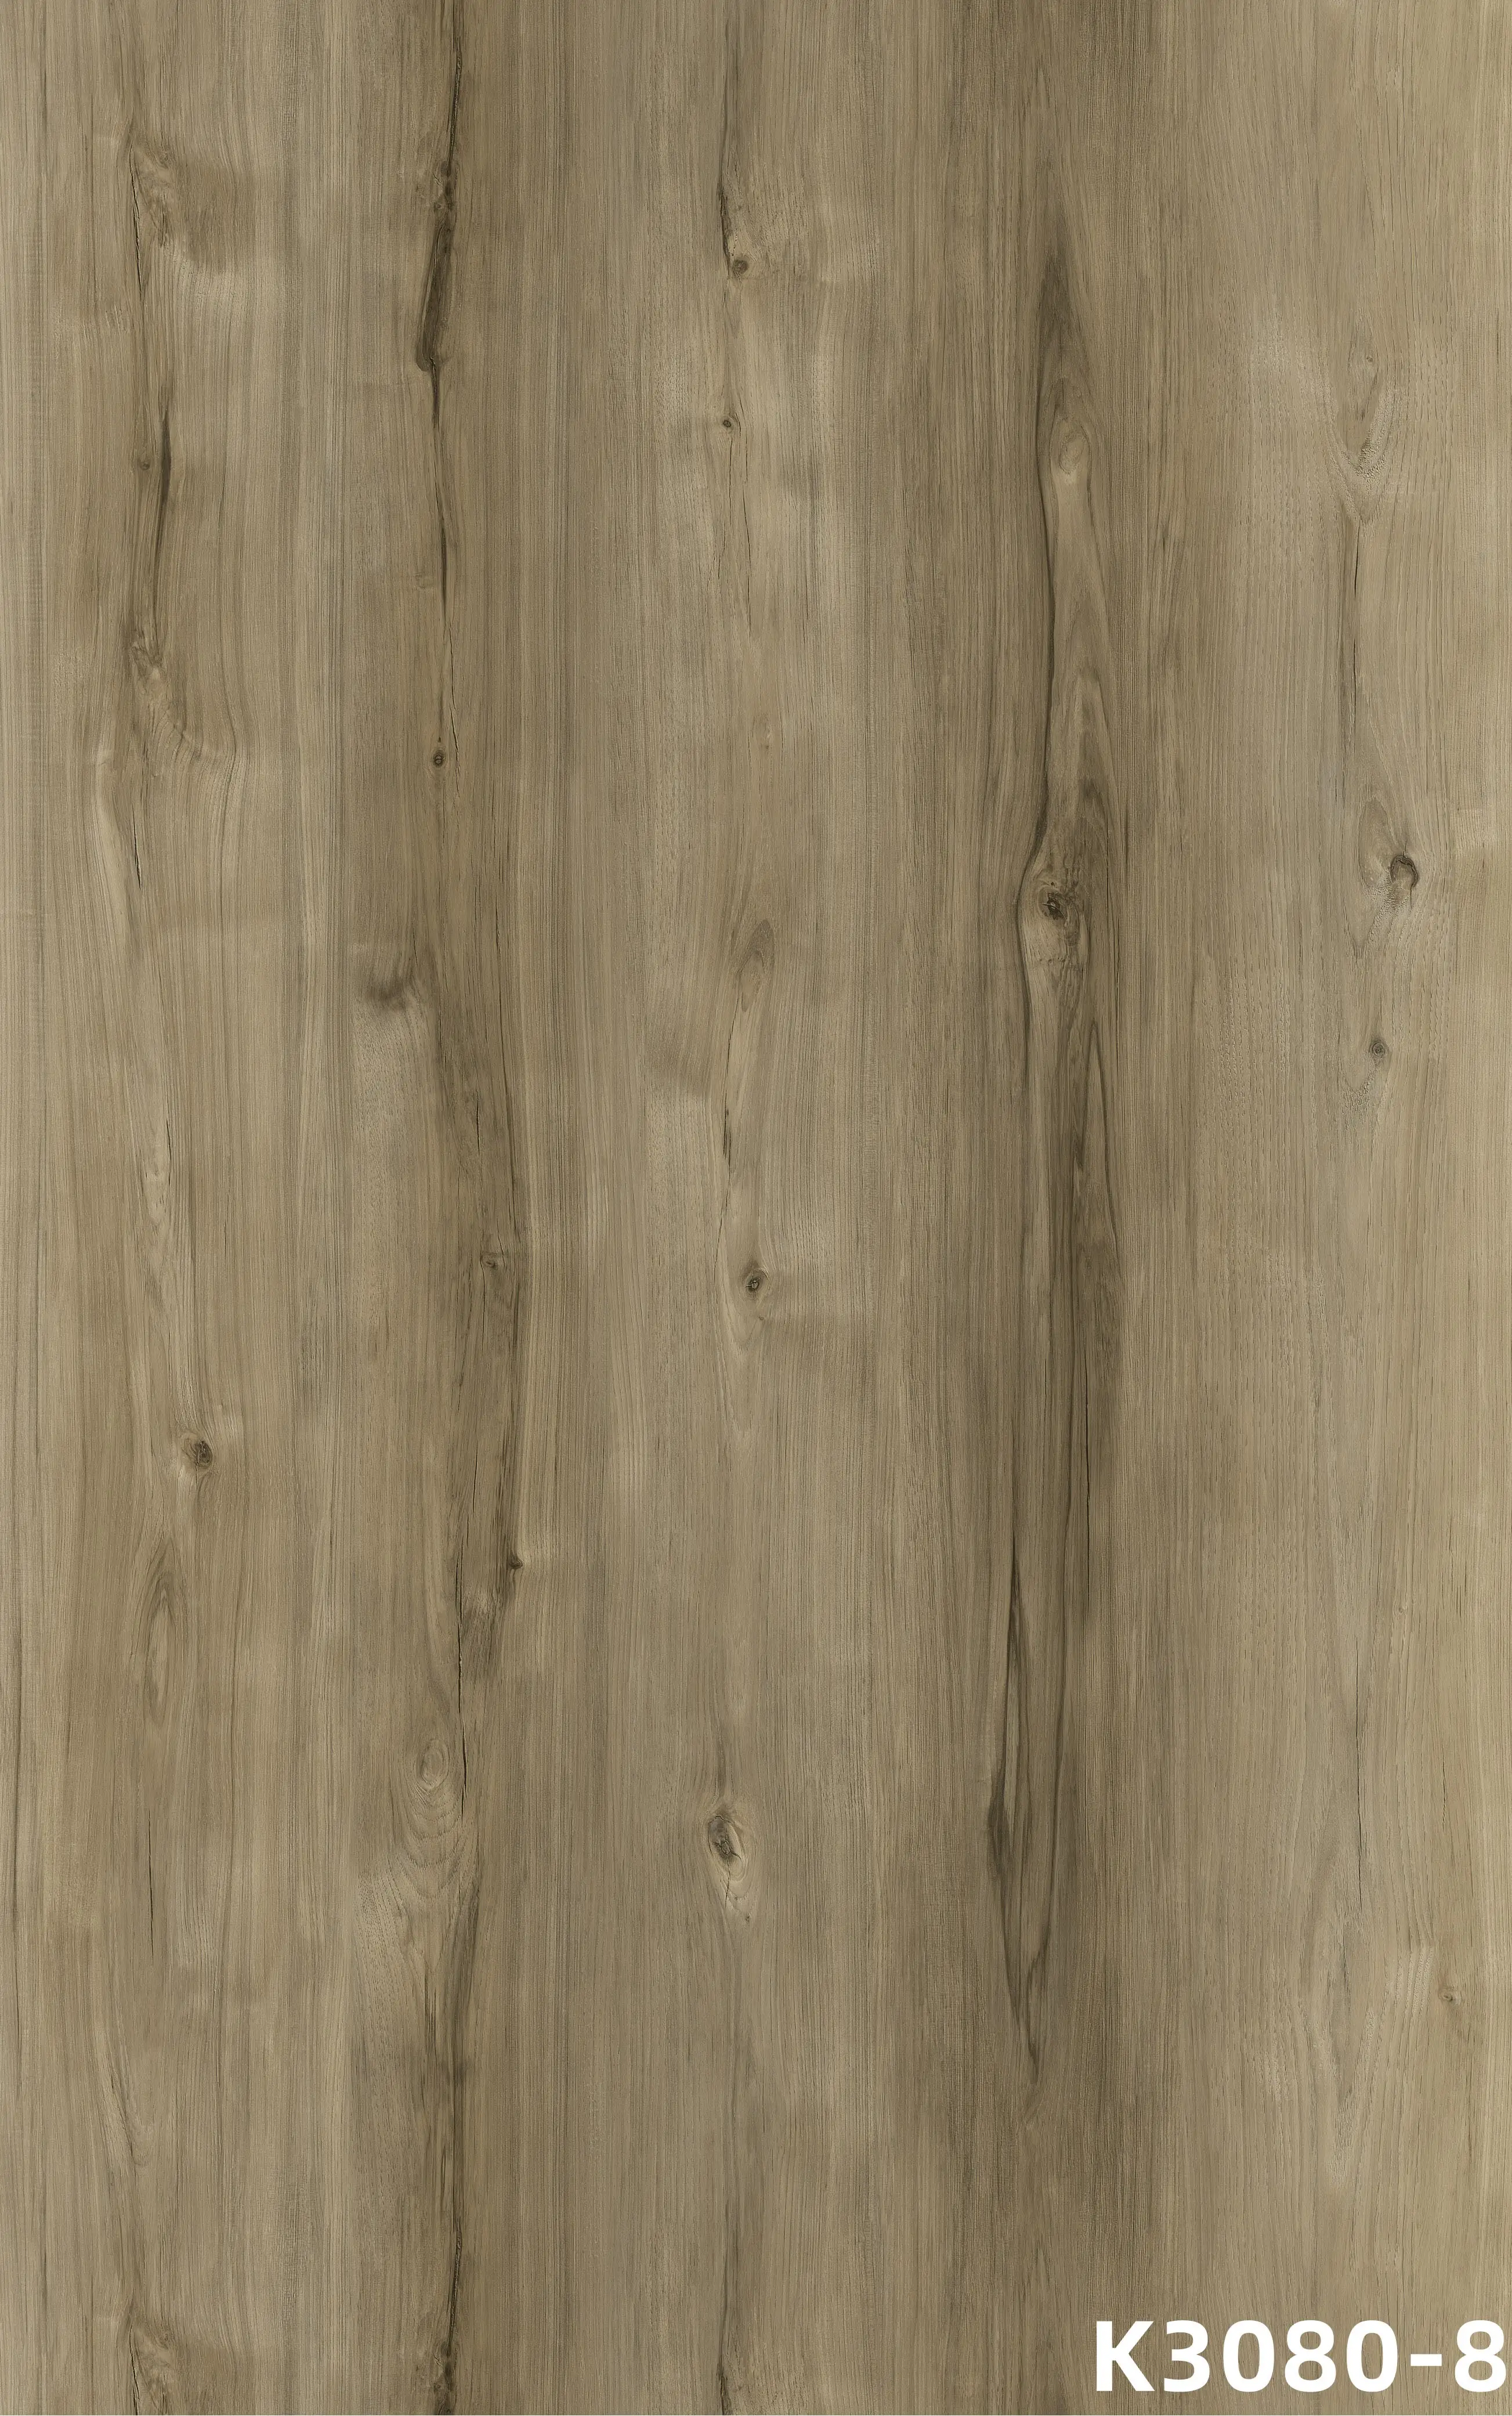 New style residential commercial waterproof 3.5mm 4mm 5mm 6mm 7mm click wood walnut SPC flooring